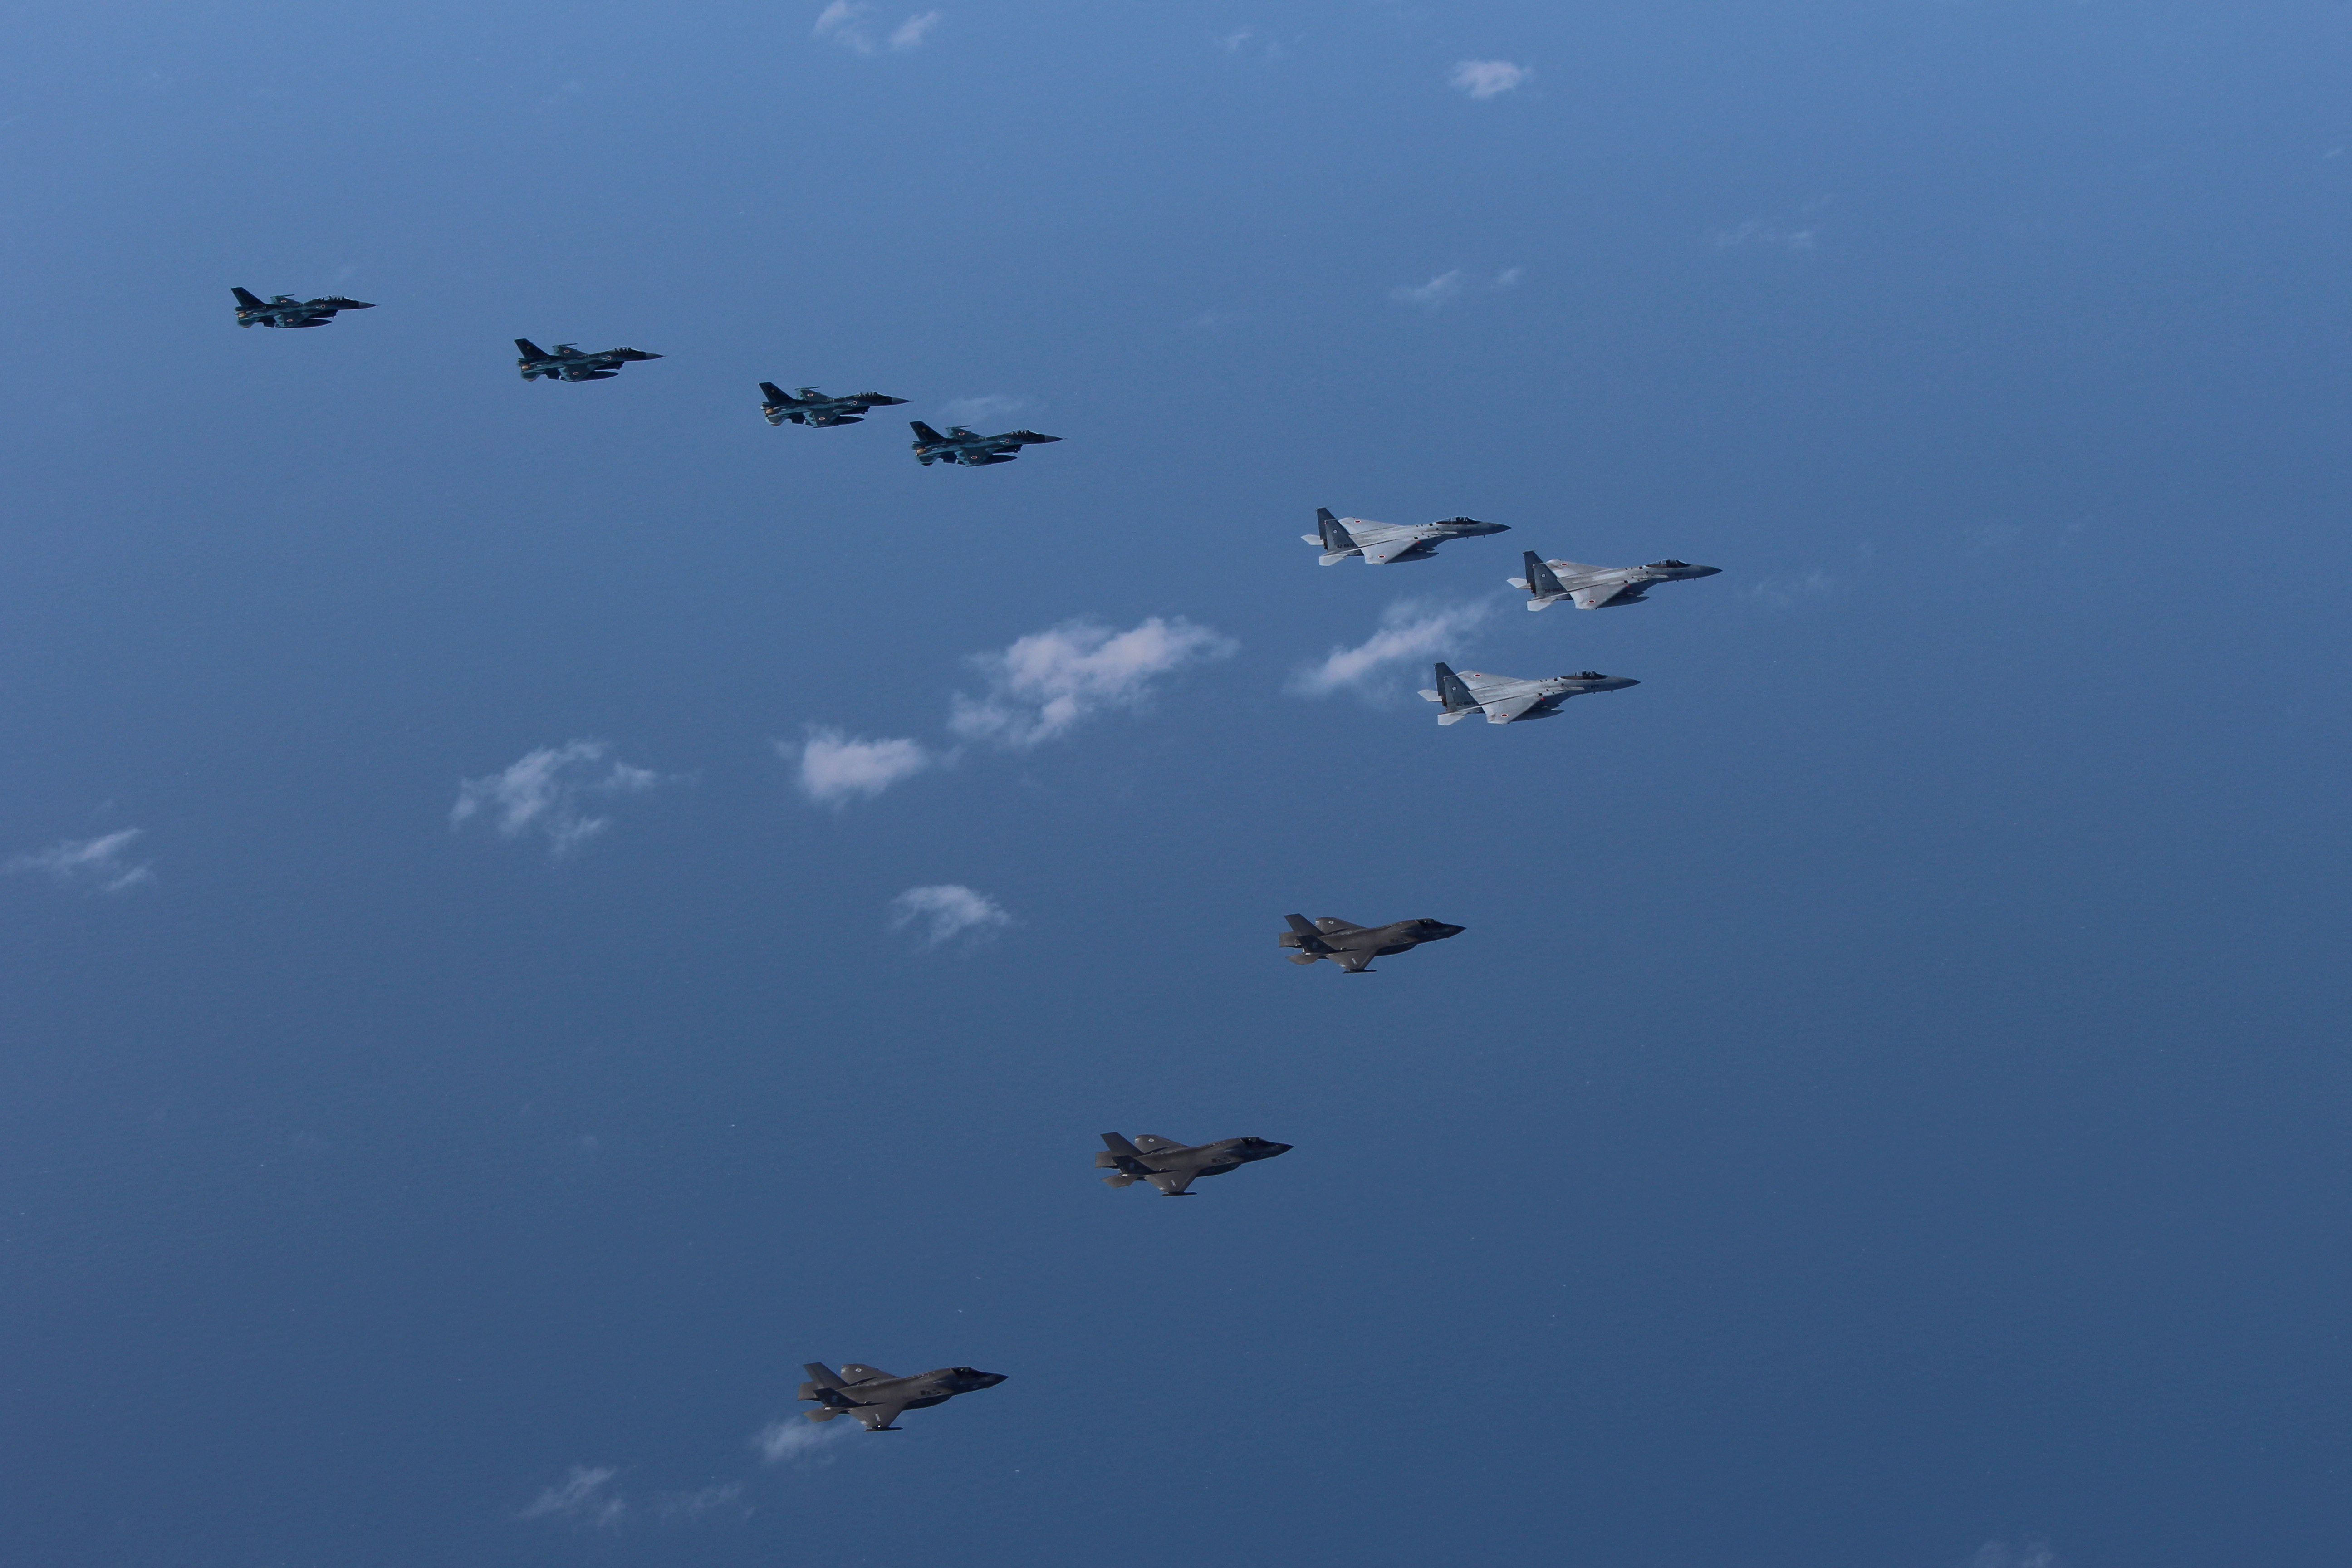 Japan Air Self-Defense Force's F-15 and F-2 fighters hold a joint military drill with U.S. Marine Aircraft Group's F-35B fighters off Japan's southernmost main island of Kyushu, Japan